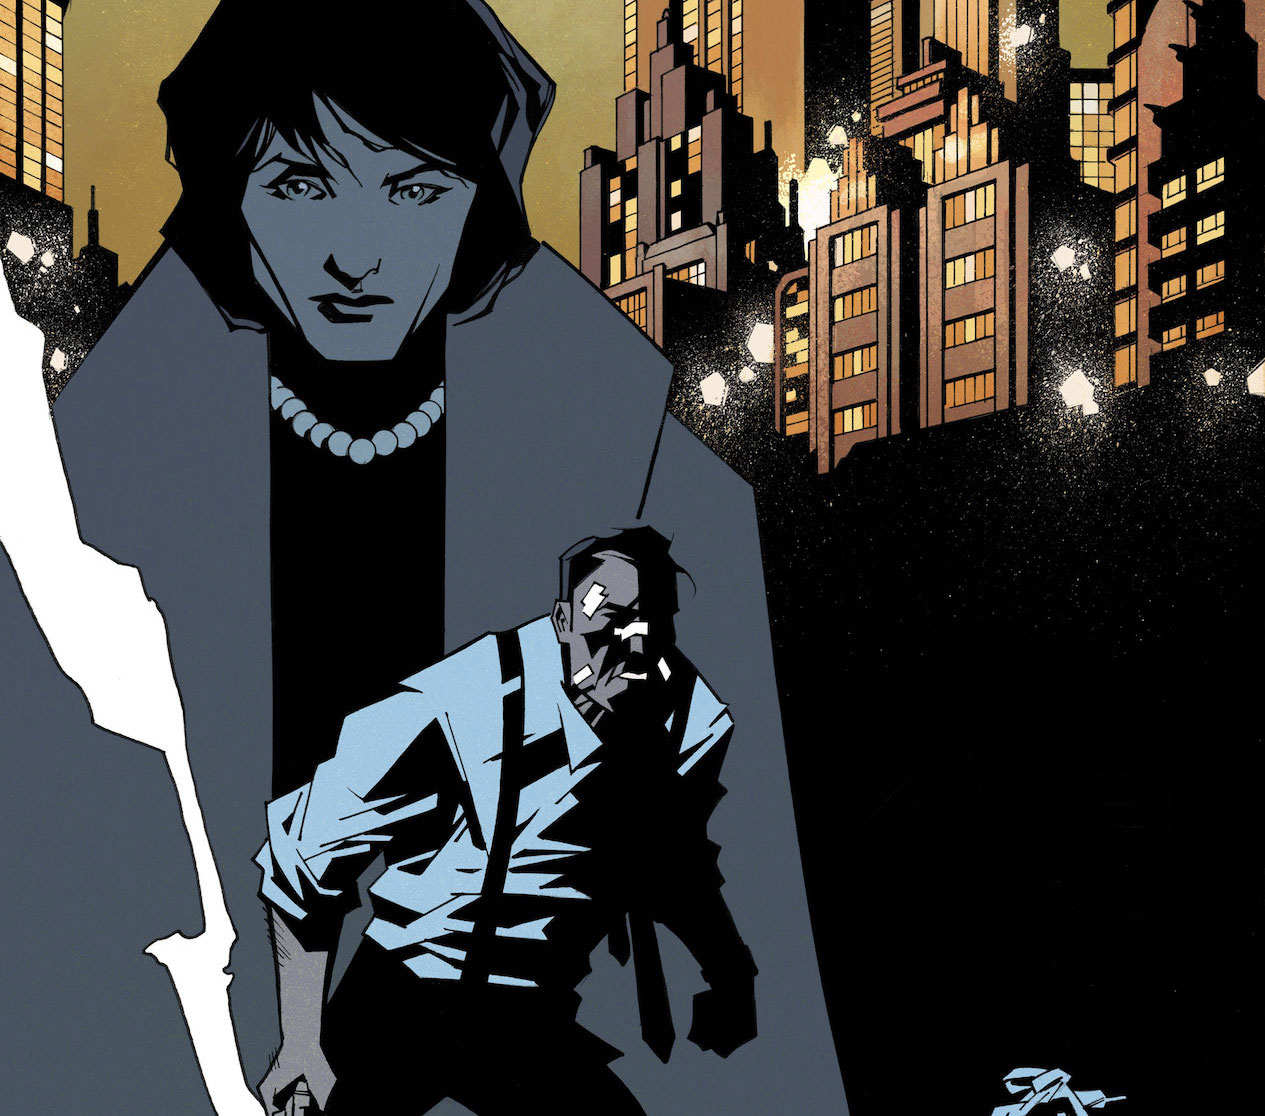 'Gotham City: Year One' #1 is a period piece with firmly realized characters